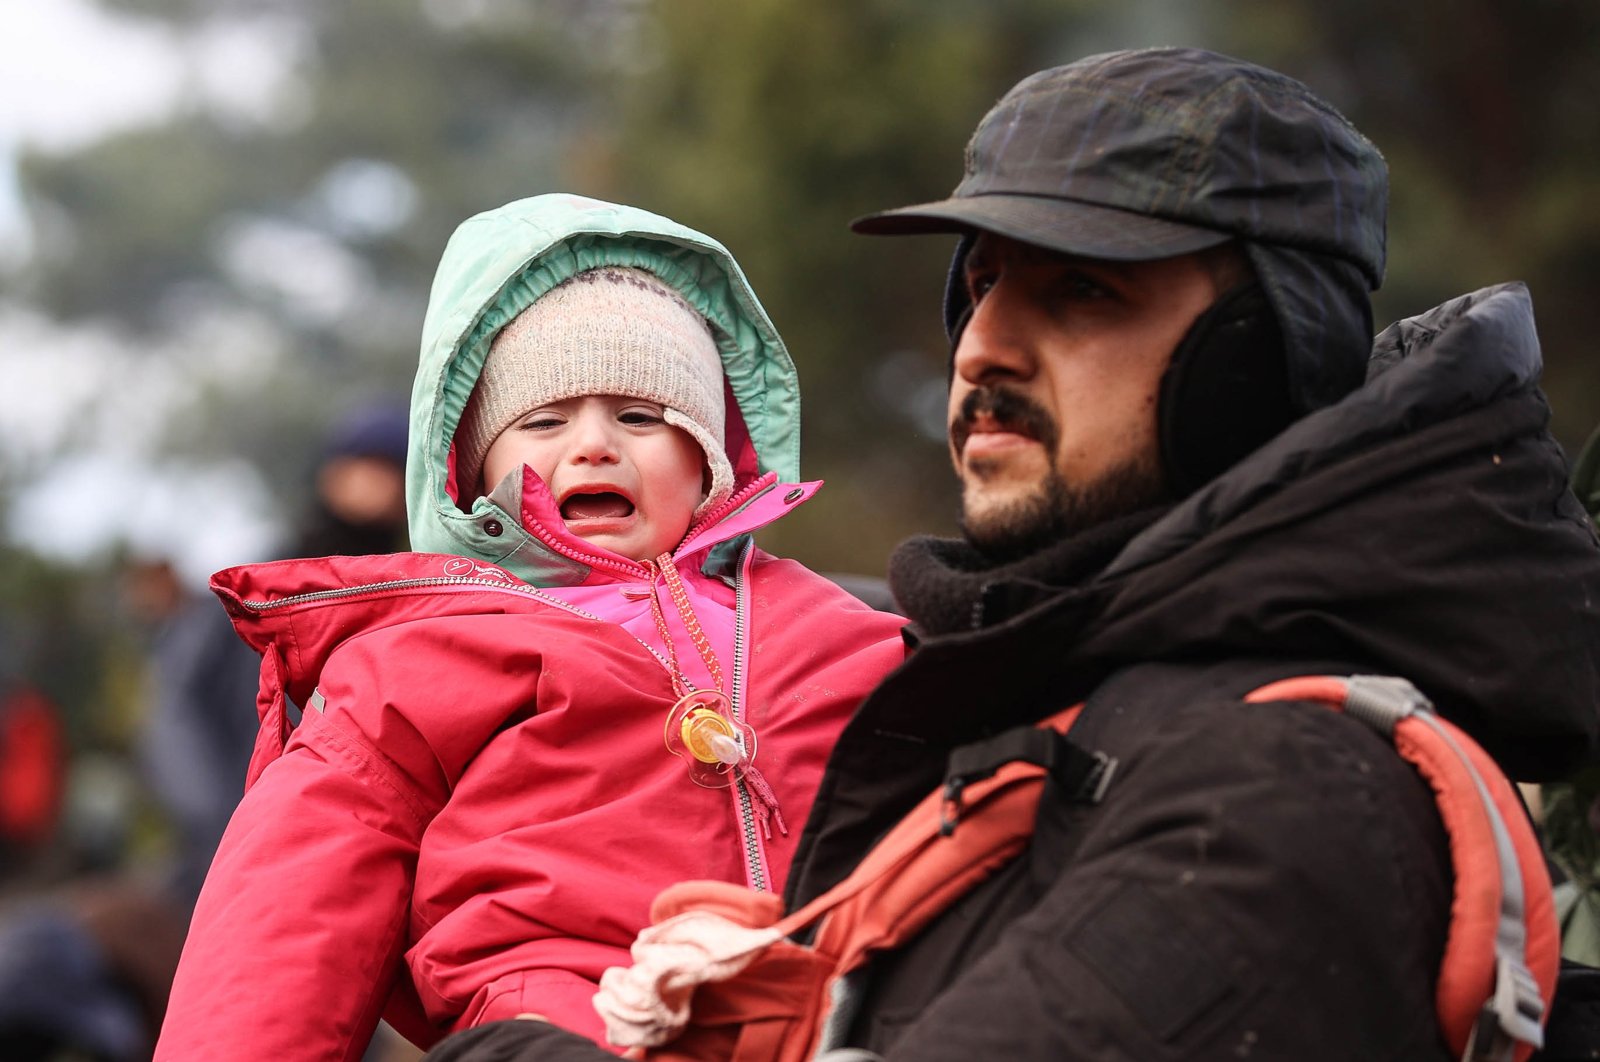 A man holds a child on the Belarusian-Polish border on Nov. 8, 2021. (TASS via Getty Images)